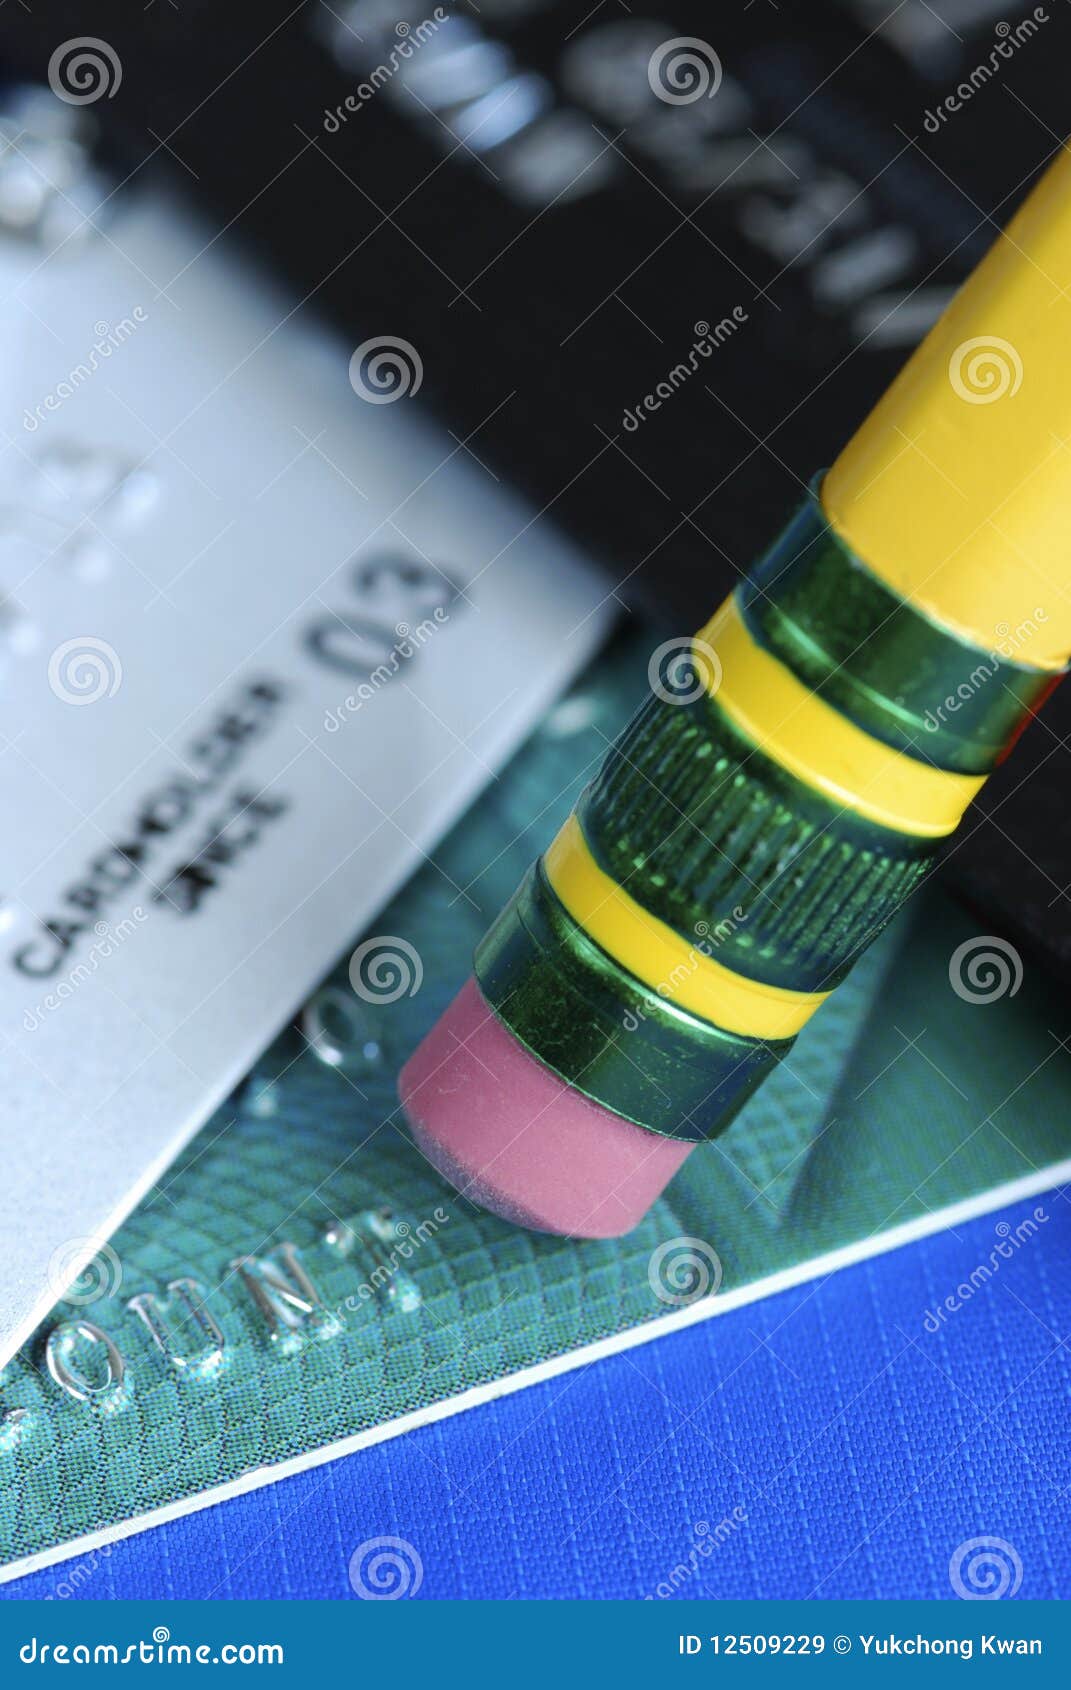 erase the debt on the credit cards